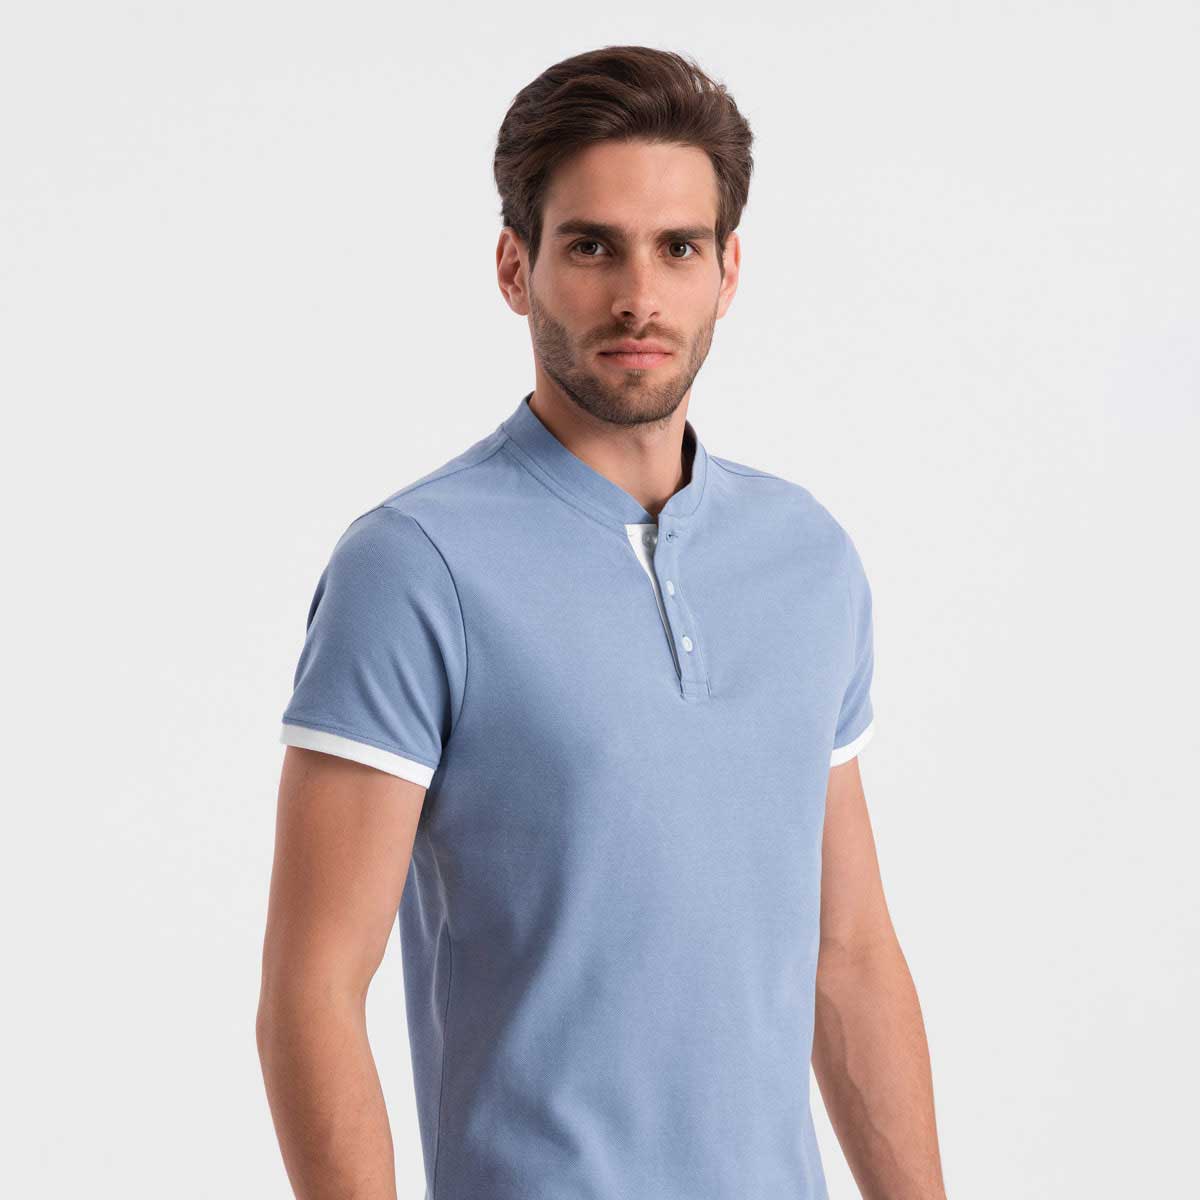 Wholesale Polo Shirts Manufacturers in Kostroma